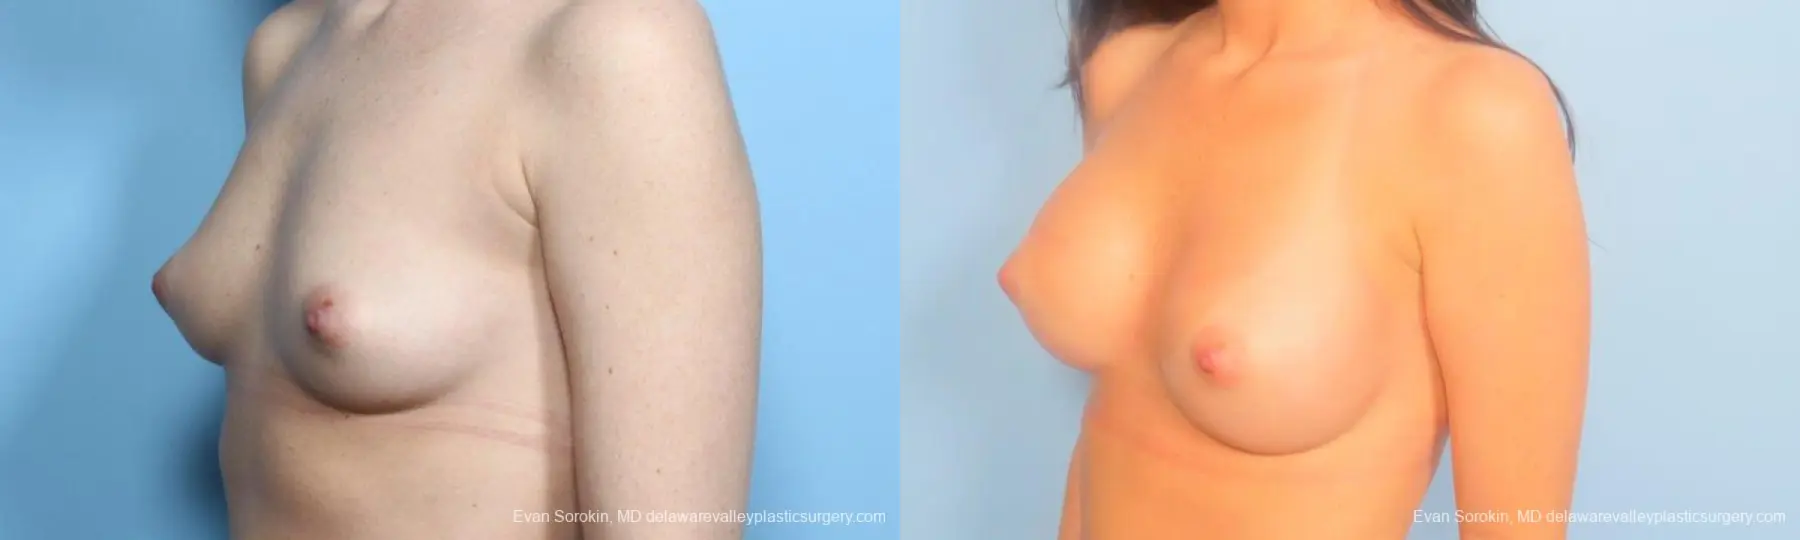 Philadelphia Breast Augmentation 9181 - Before and After 4